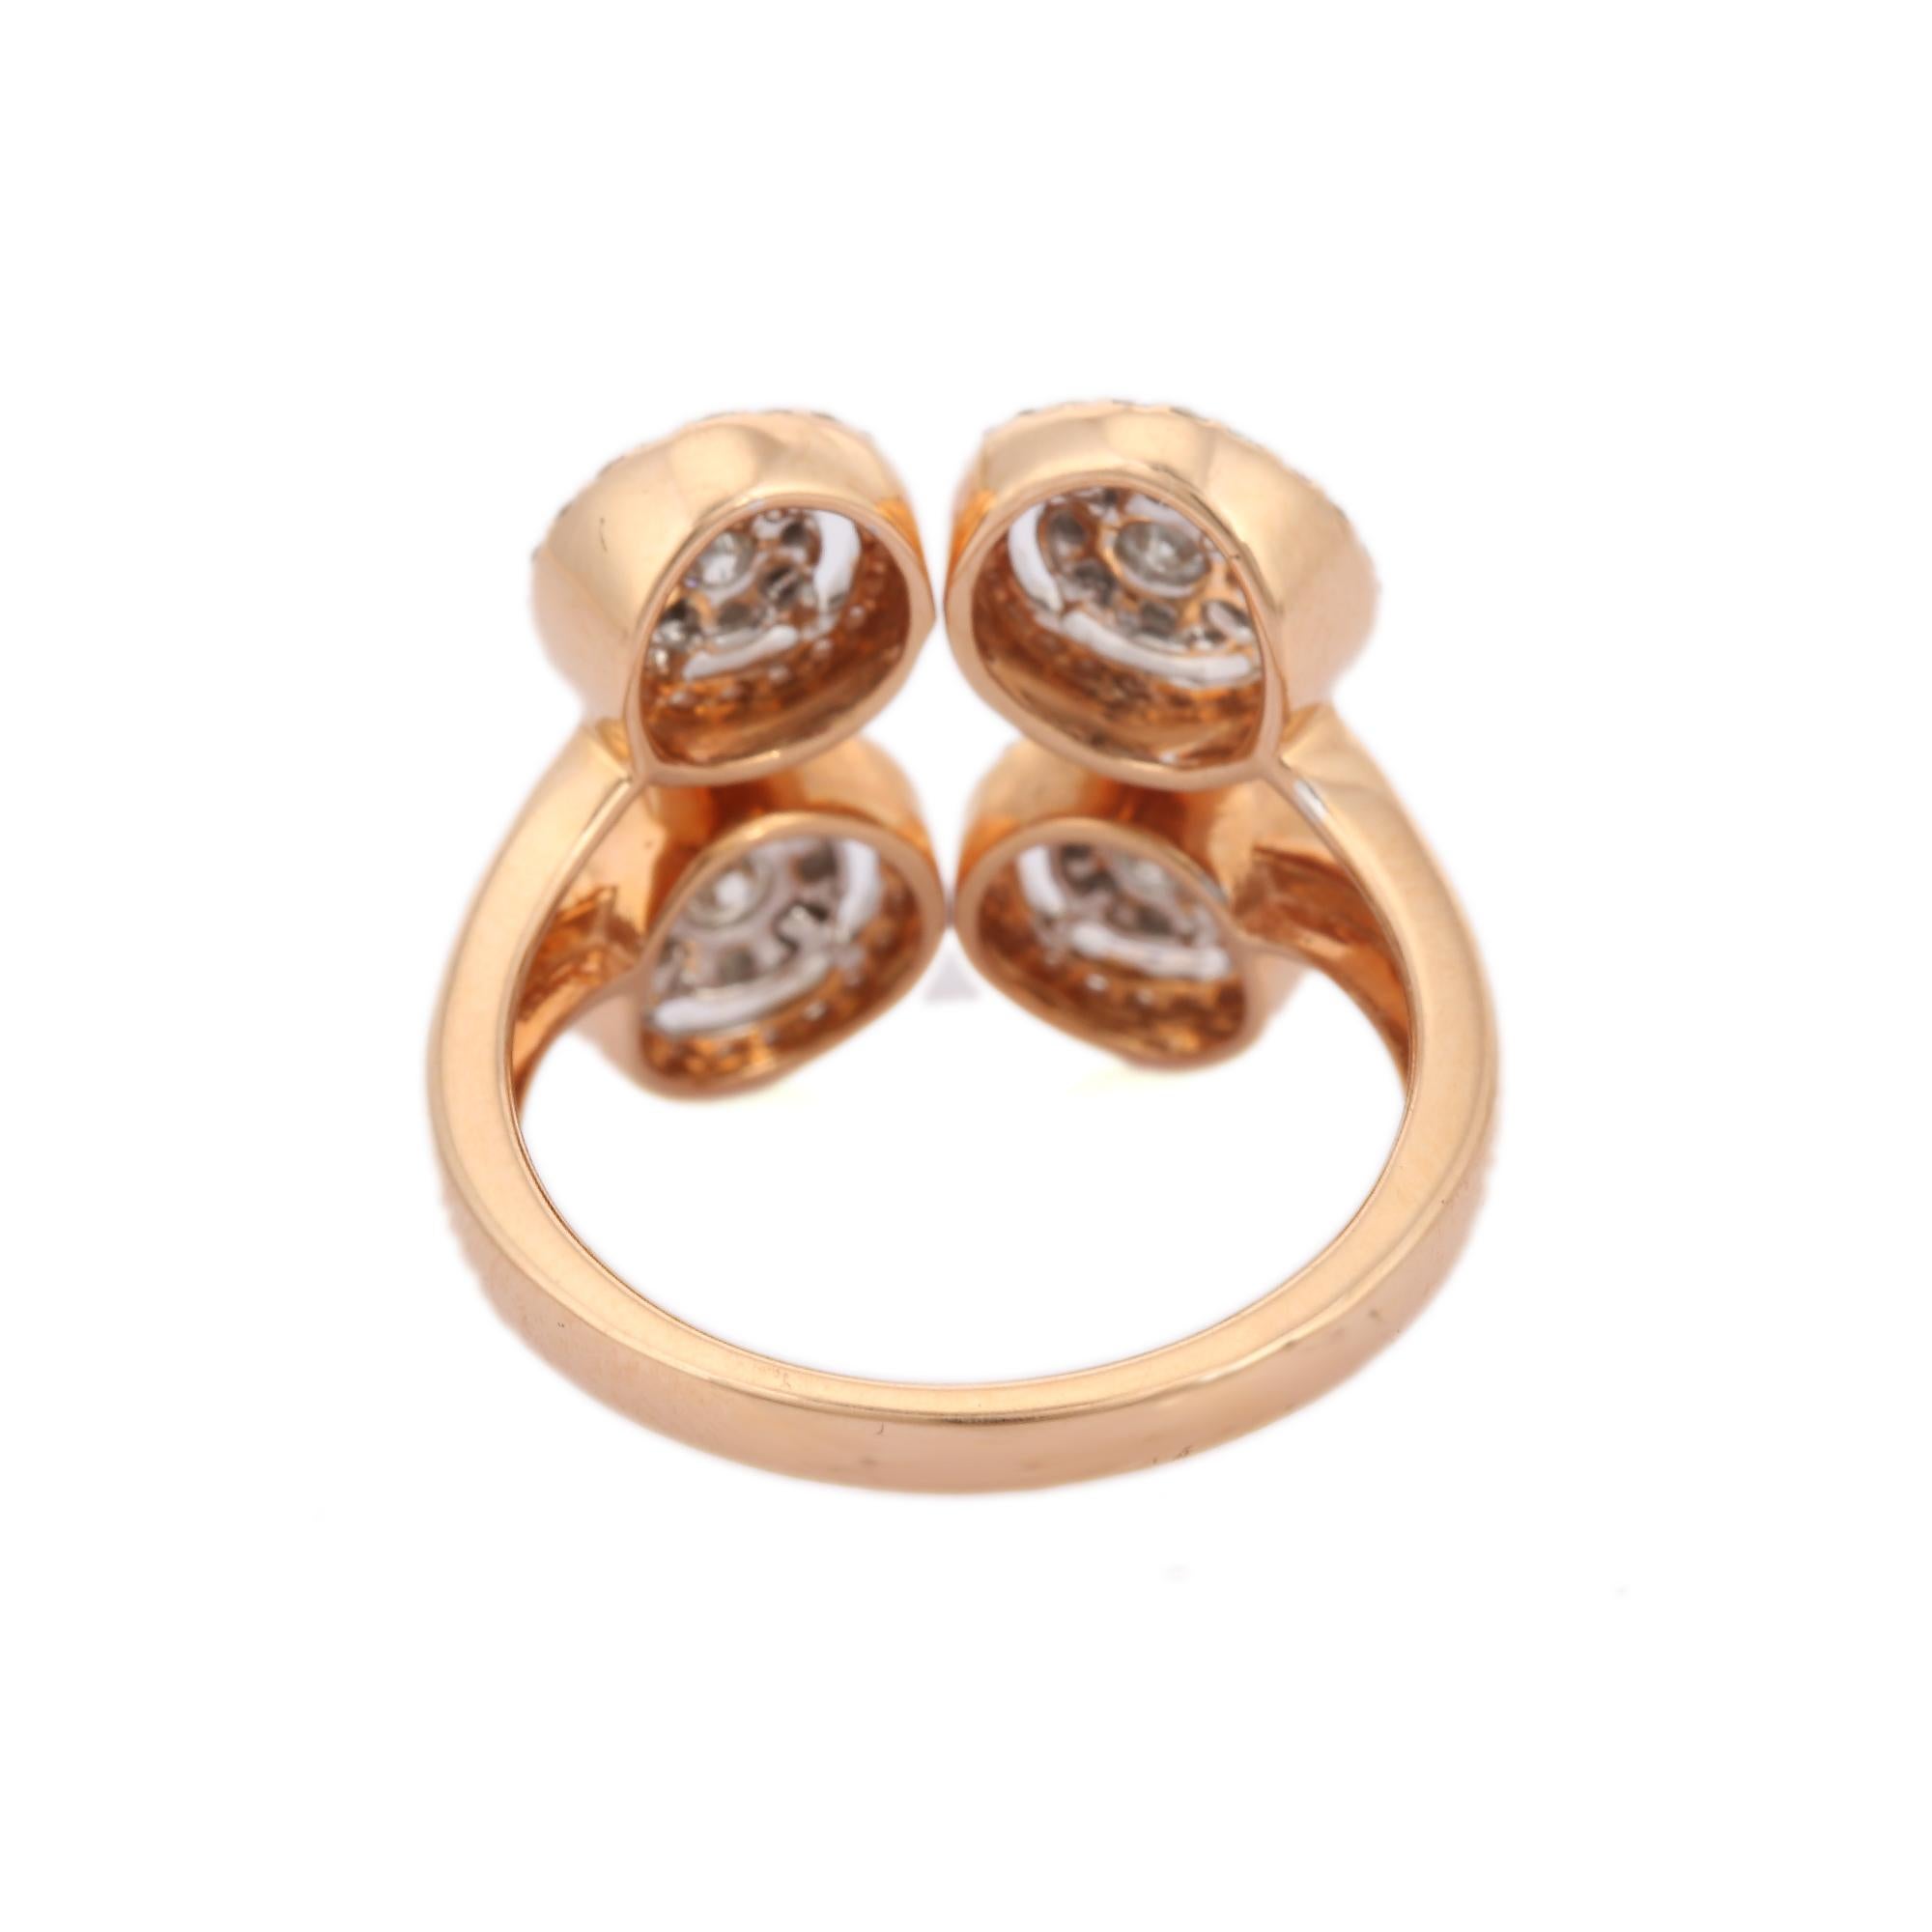 For Sale:  Statement Illusion Diamond Wedding Cluster Ring in 18K Solid Rose Gold 5